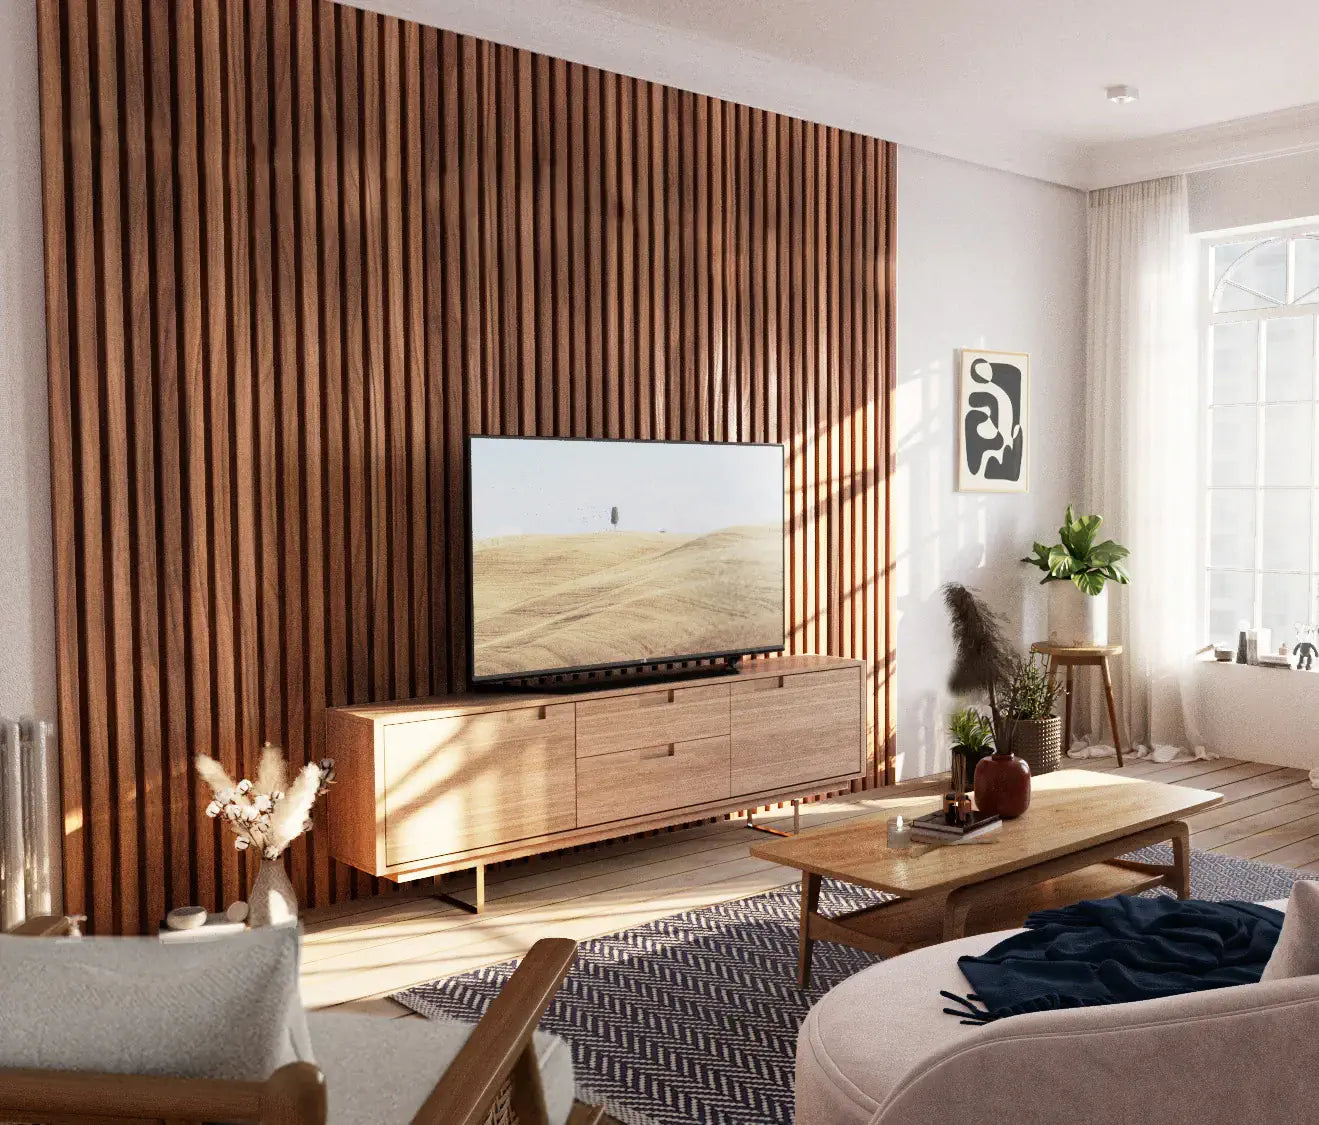 7 Types of Wood Paneling for Your Home